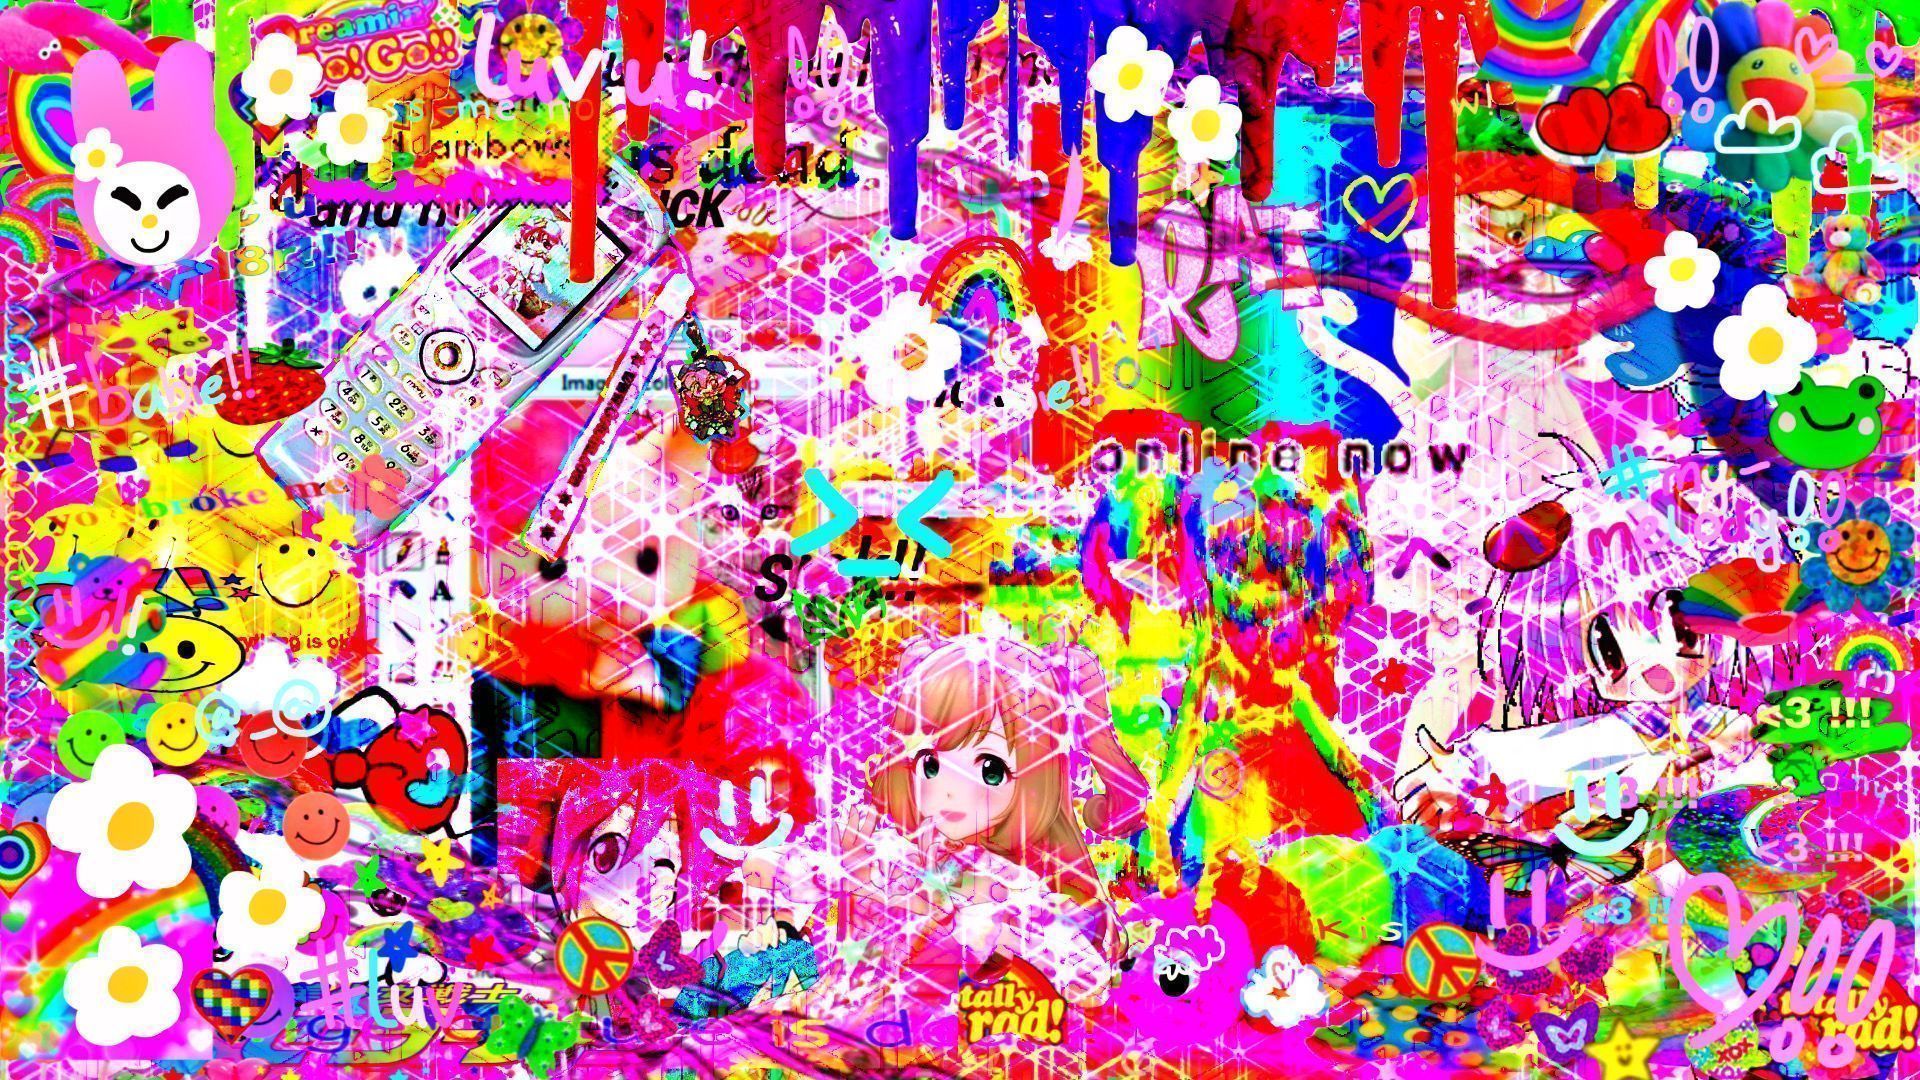 A colorful picture with lots of different characters - Webcore, weirdcore, glitchcore, animecore